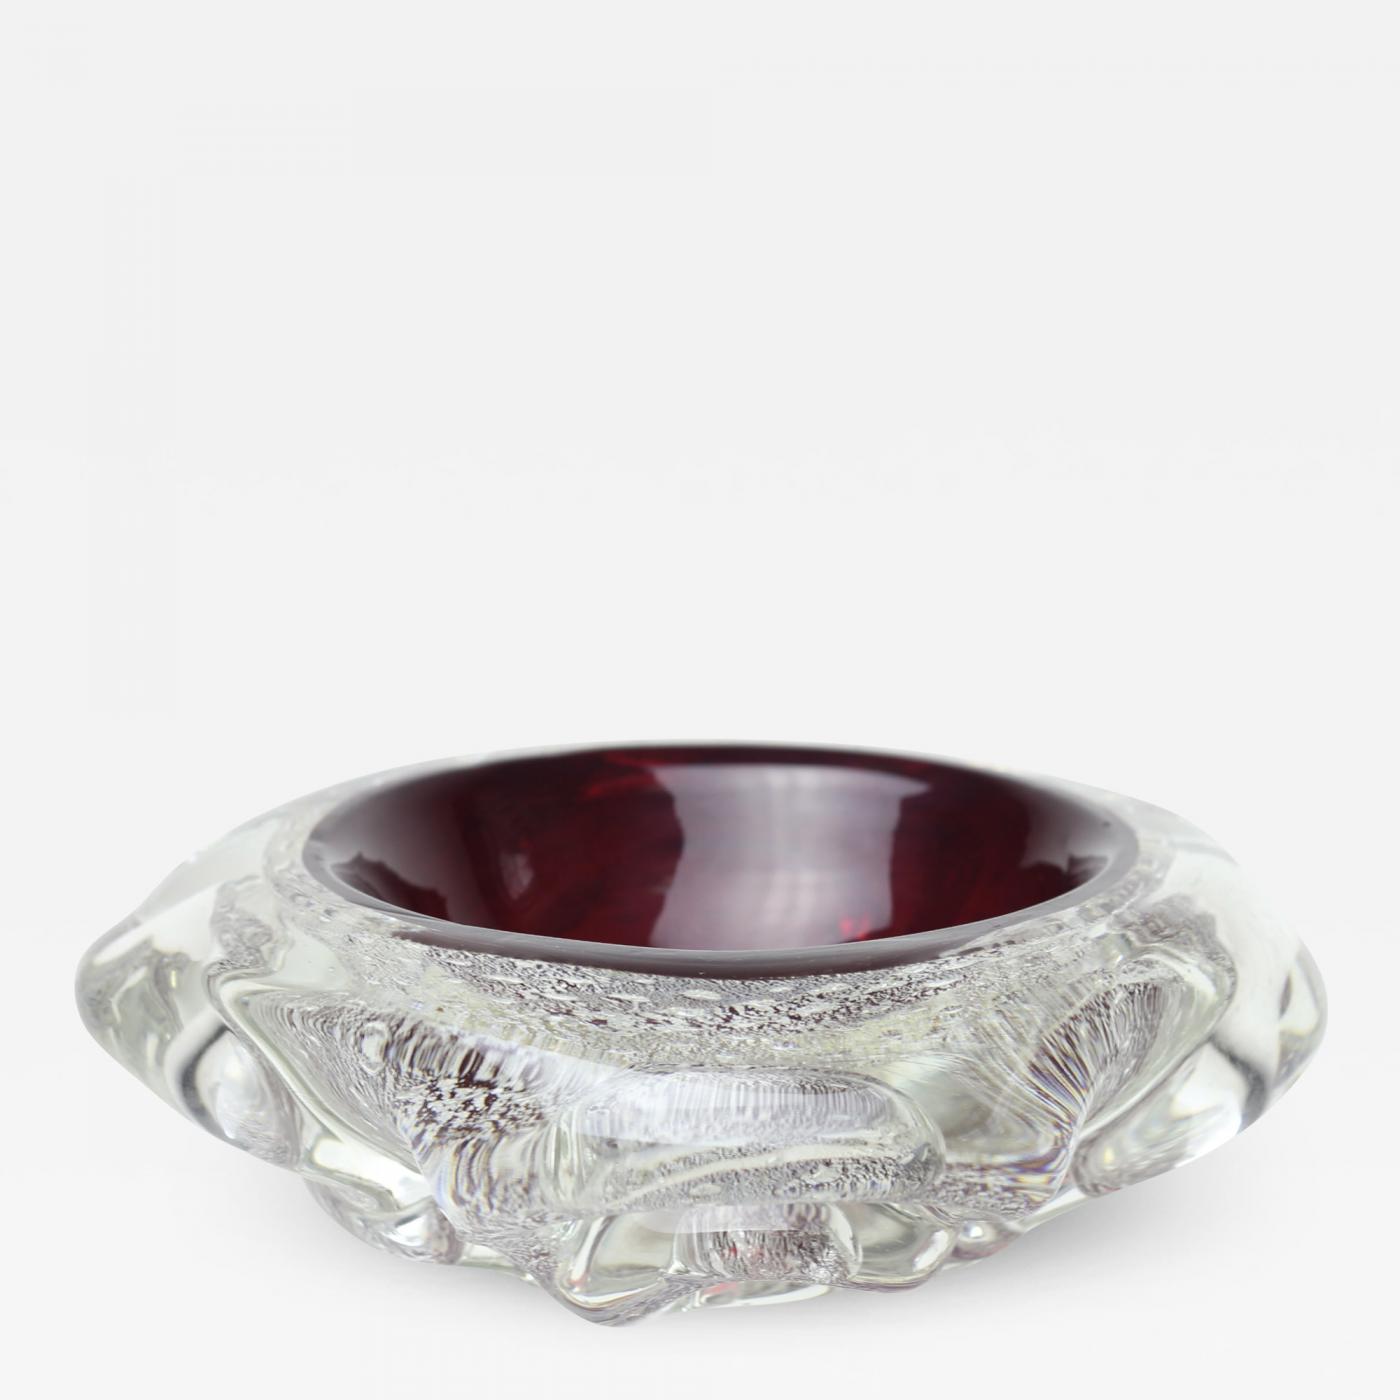 https://cdn.incollect.com/sites/default/files/zoom/Archimede-Seguso-Archimede-Seguso-Ruby-Red-Glass-Bowl-with-Silver-Aventurine-Fleck-1950-Italy-657310-3192227.jpg